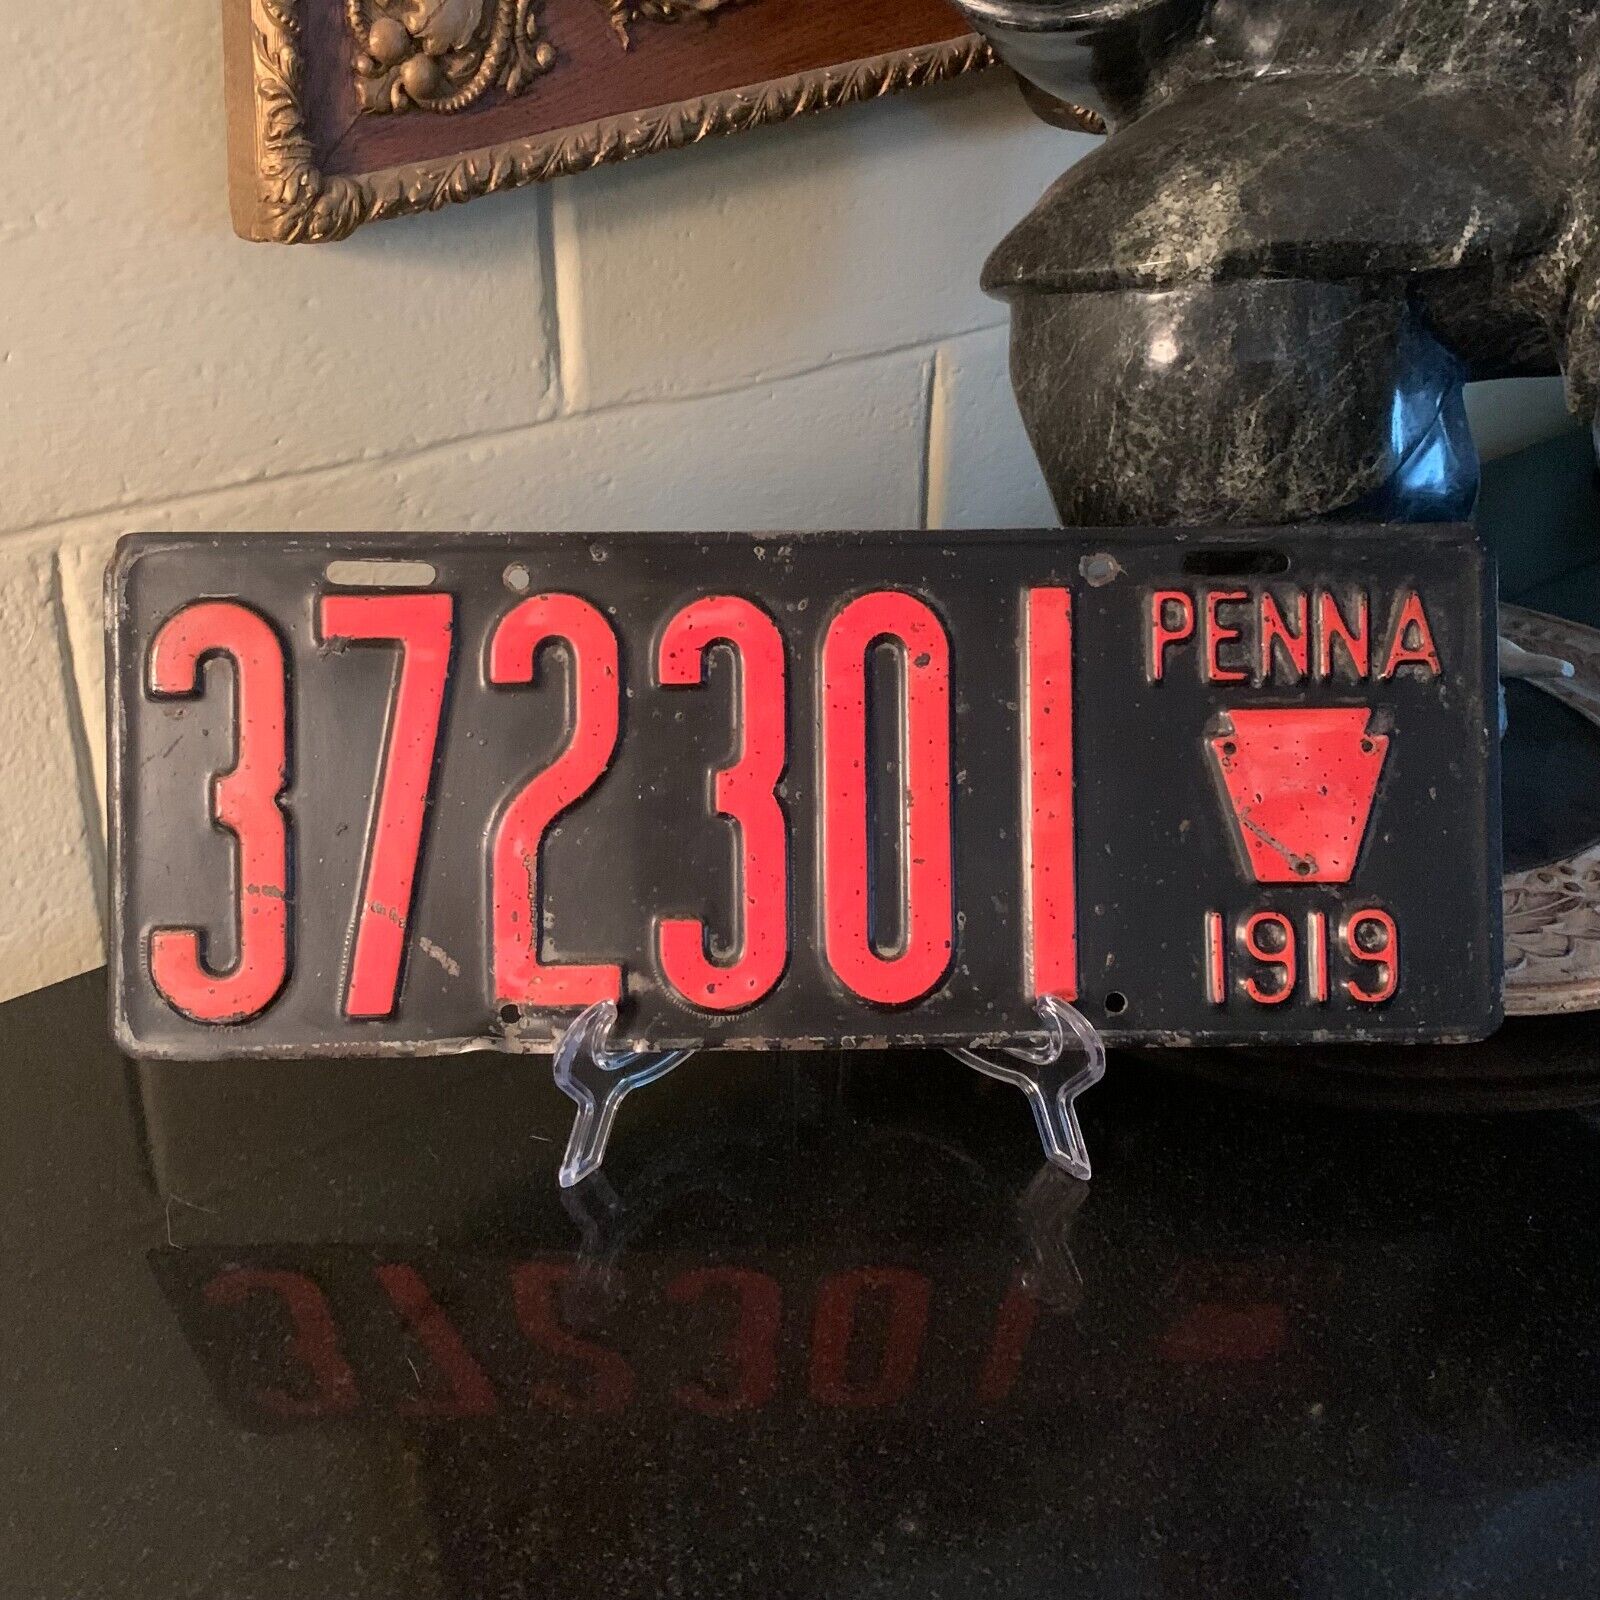 1919 Pennsylvania License Plate Black w/Red Numbers 372301 Penna Very Good